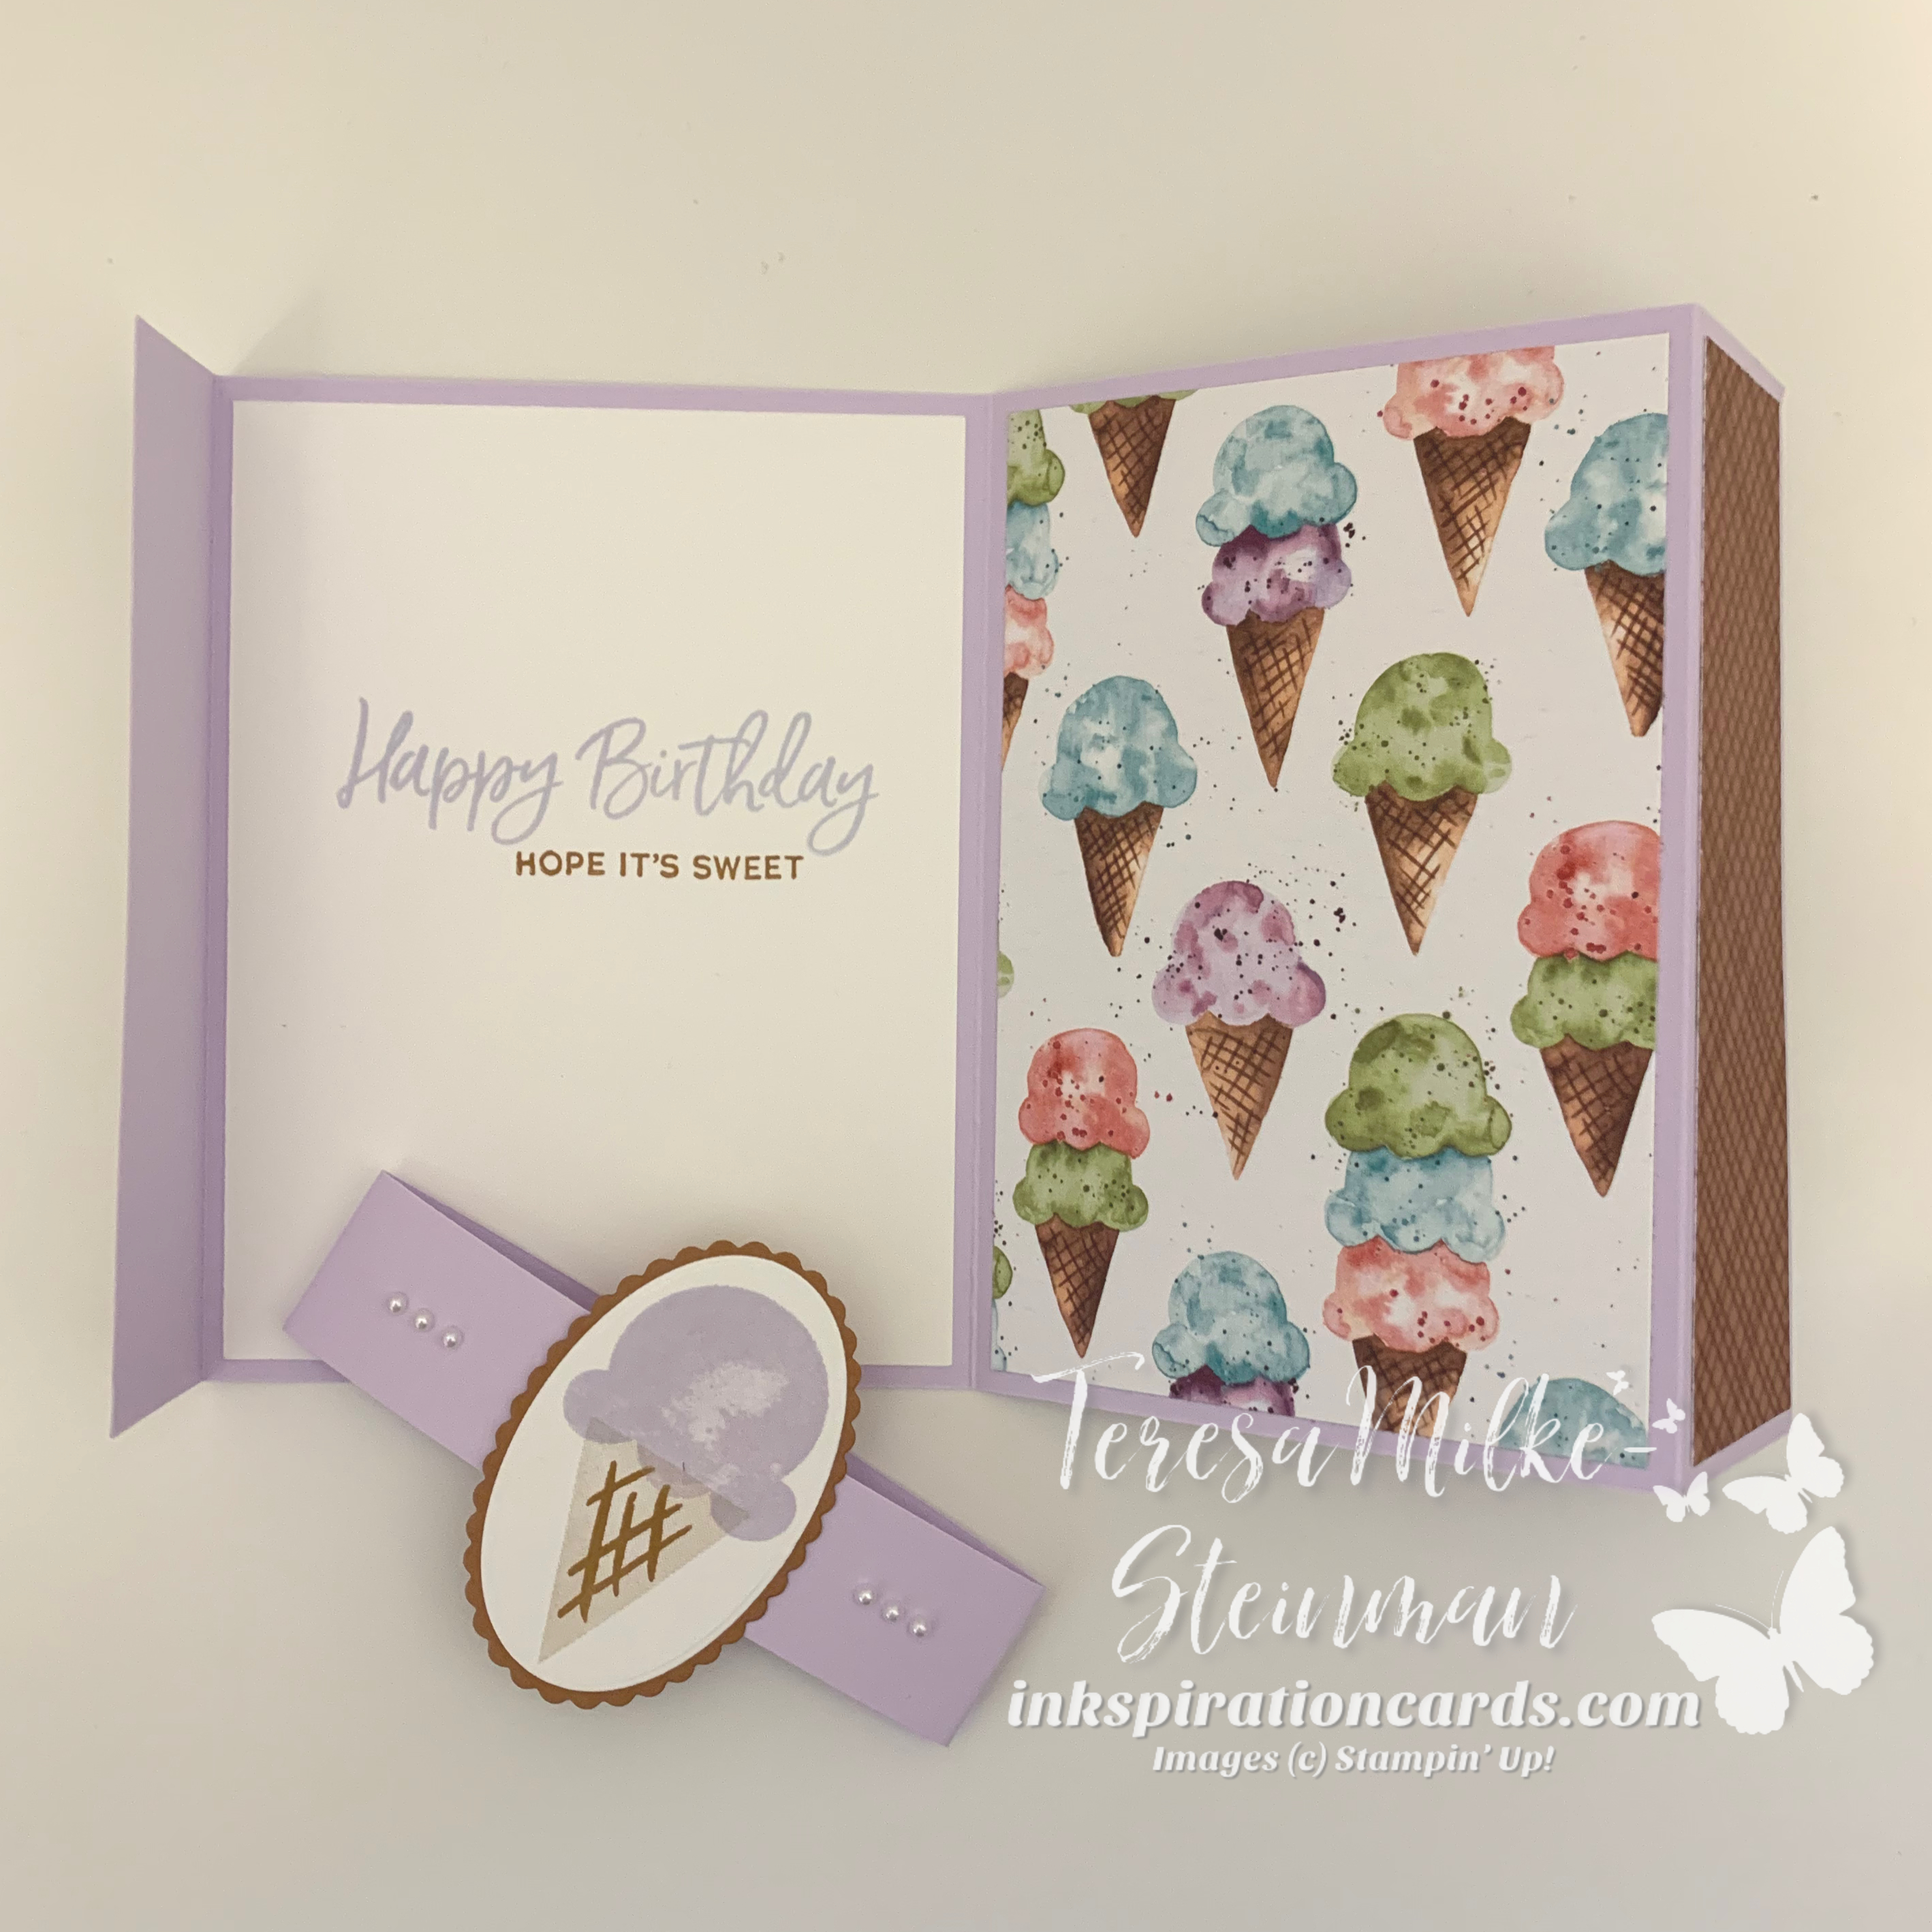 Two Fold Panel Card